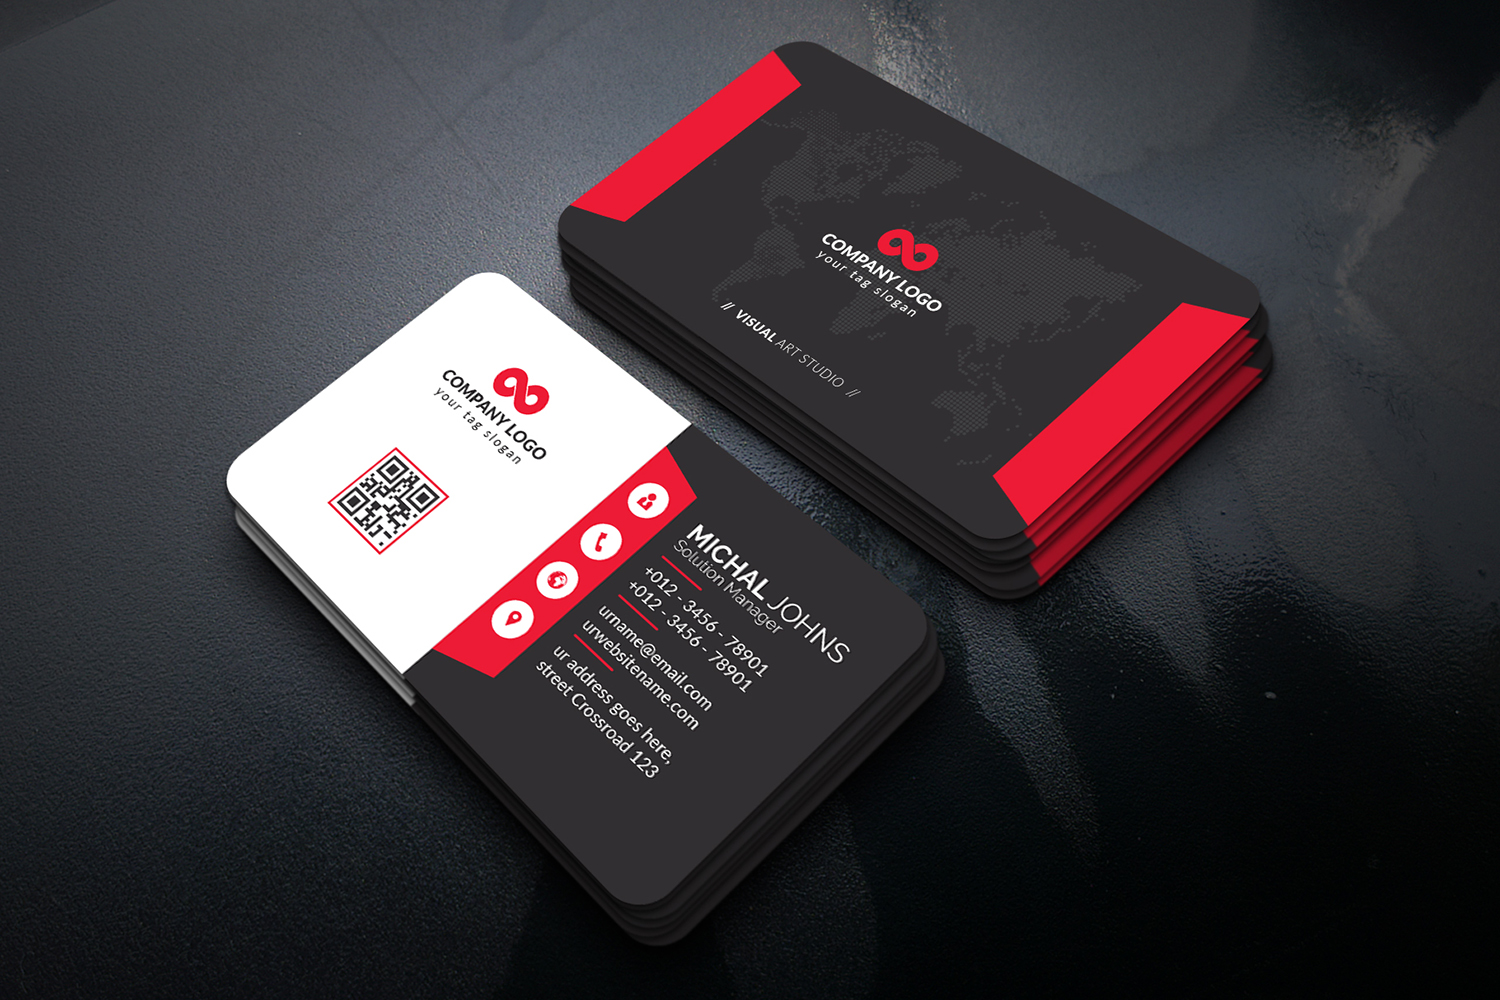 Modern Business Cards - Corporate Identity Template